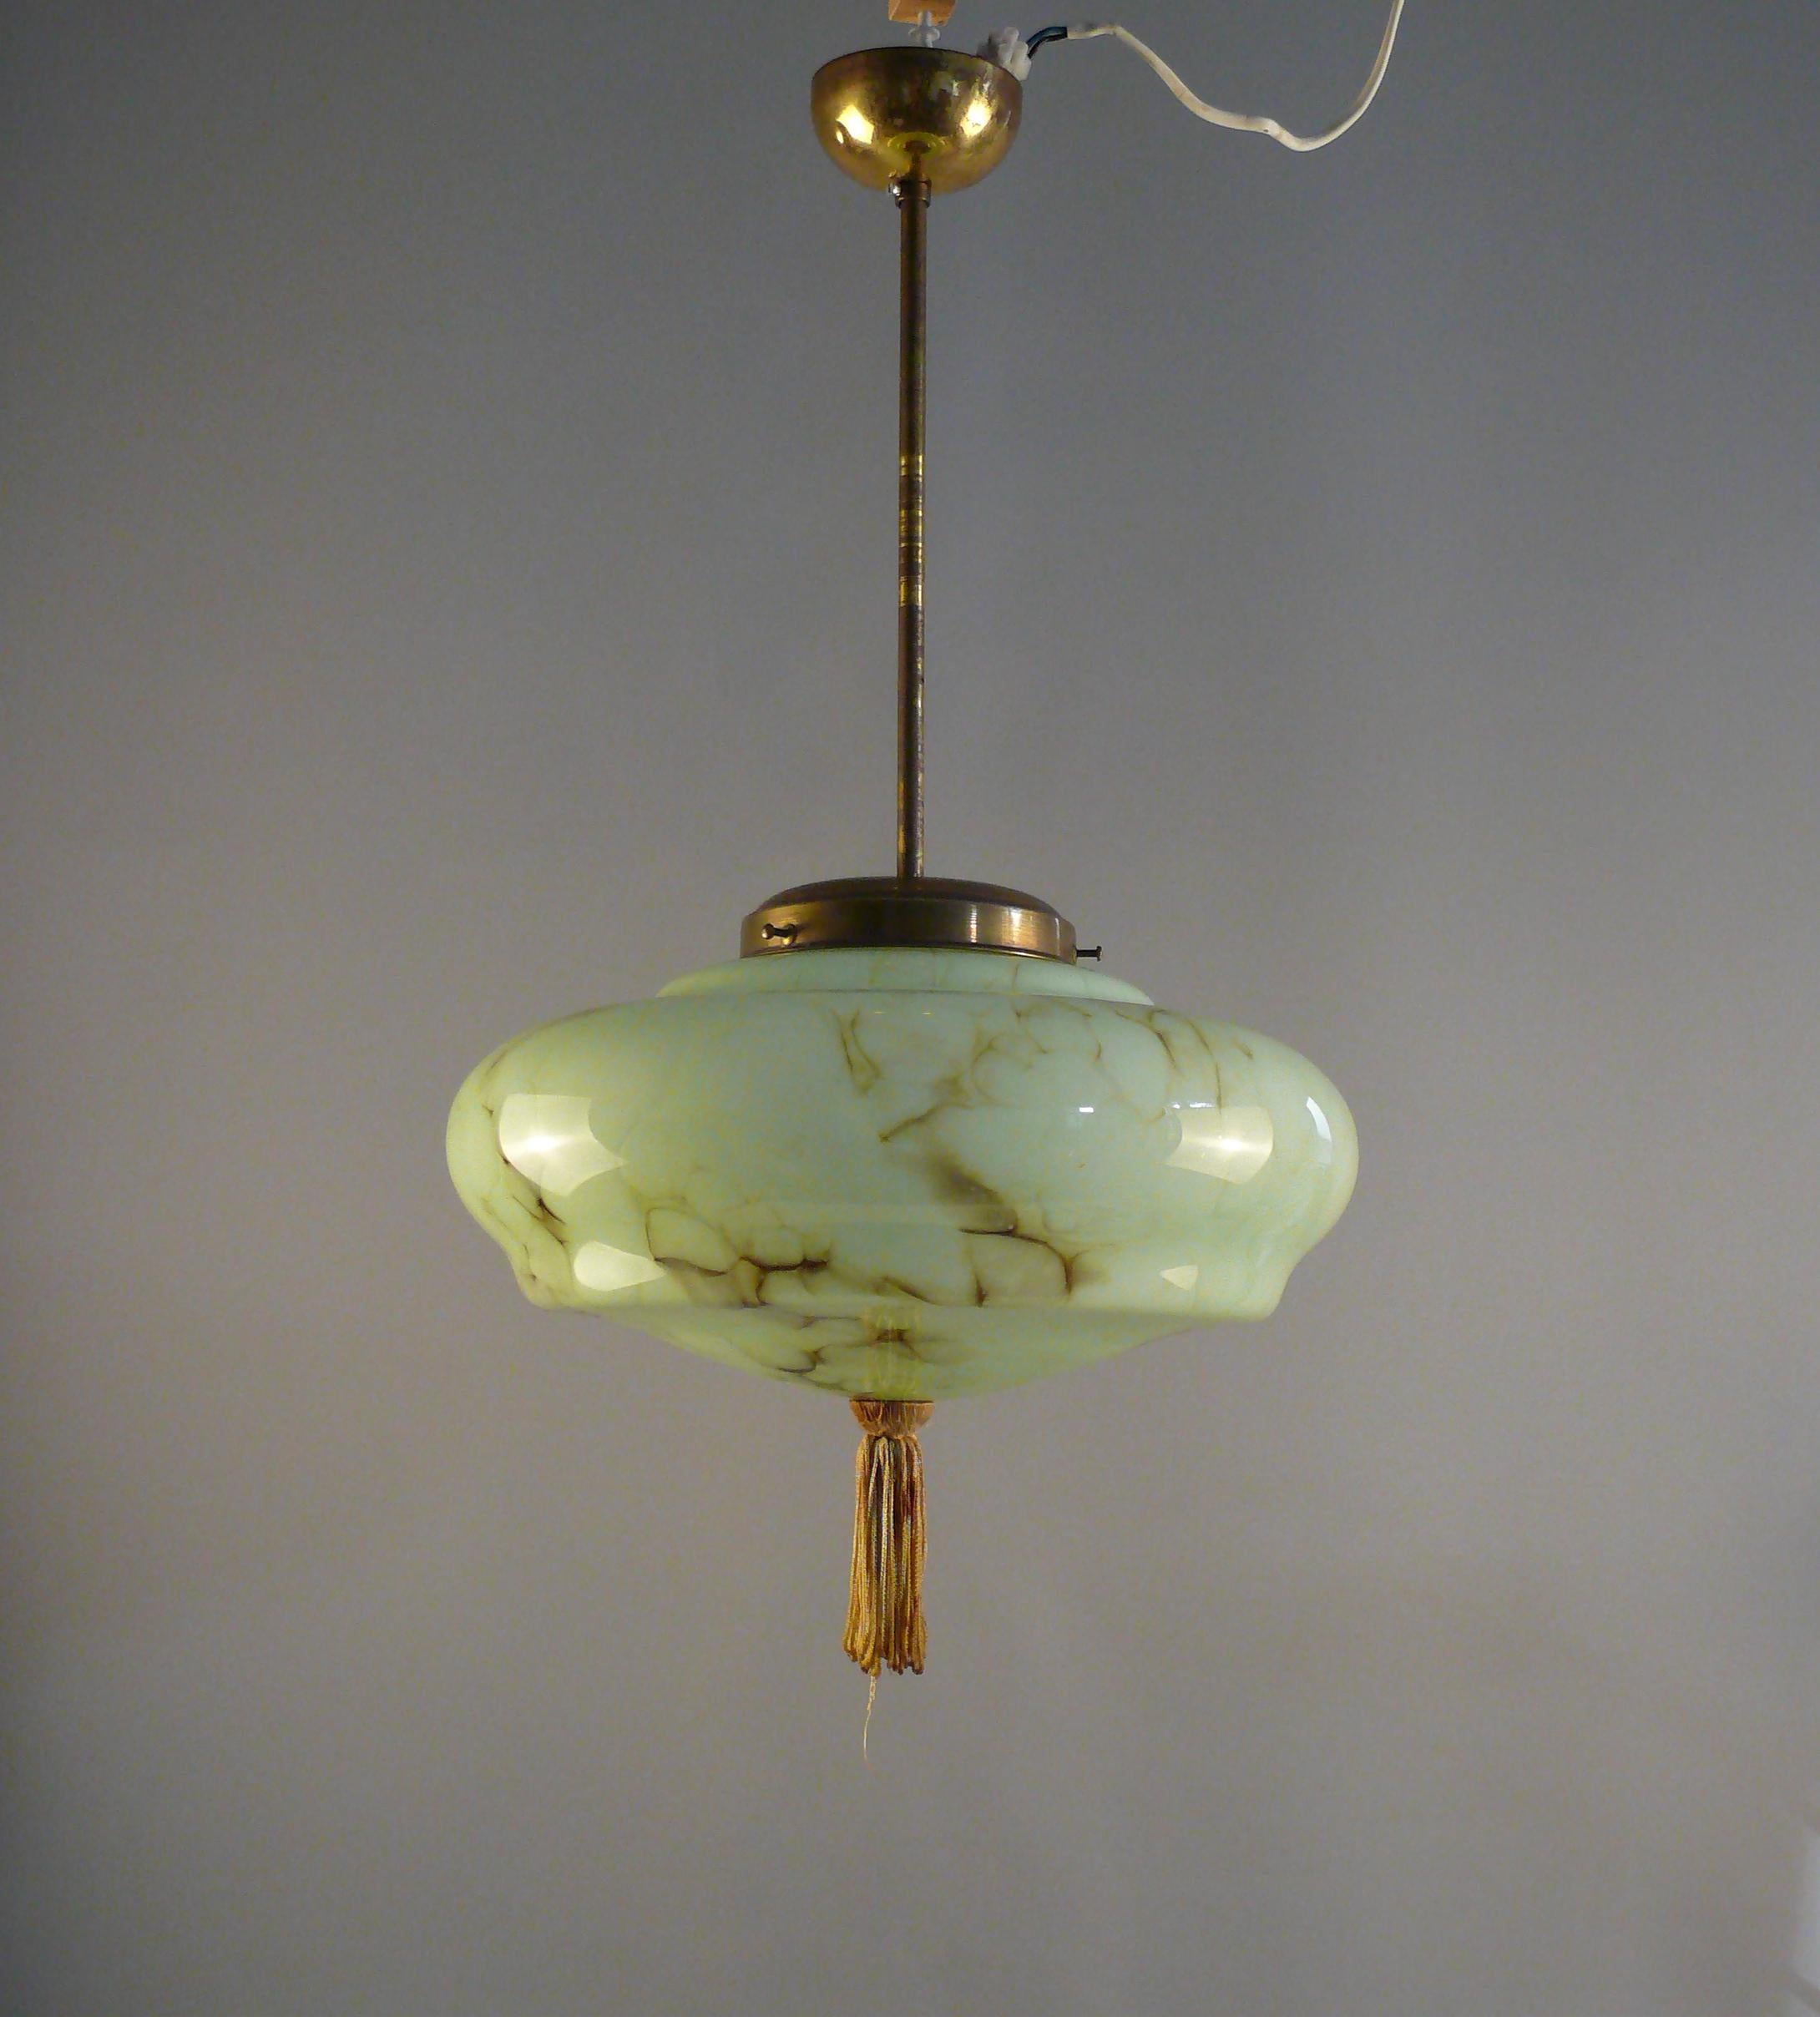 Art Deco rod pendant lamp from the 1930s - 1940s with a very beautiful, mint green glass shade. The glass shade has an elegant shape with subtle marbling and is in immaculate condition. The glass holder, the pendulum rod and the canopy are made of